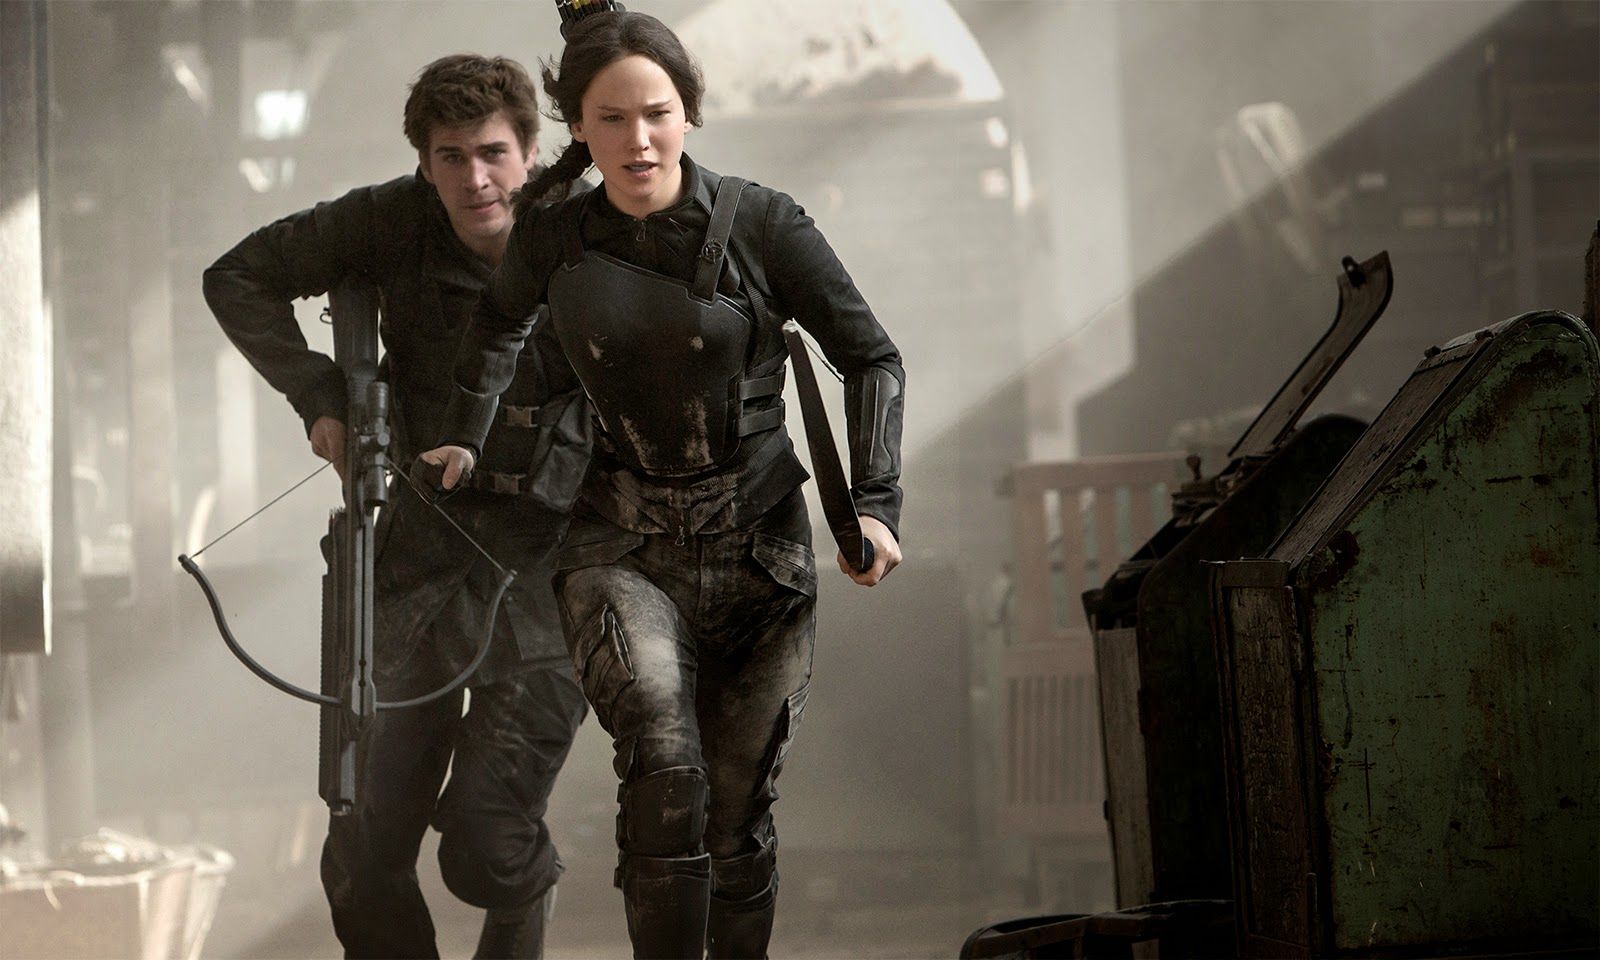 The Hunger Games Mockingjay Part 1 - Katniss and Gale